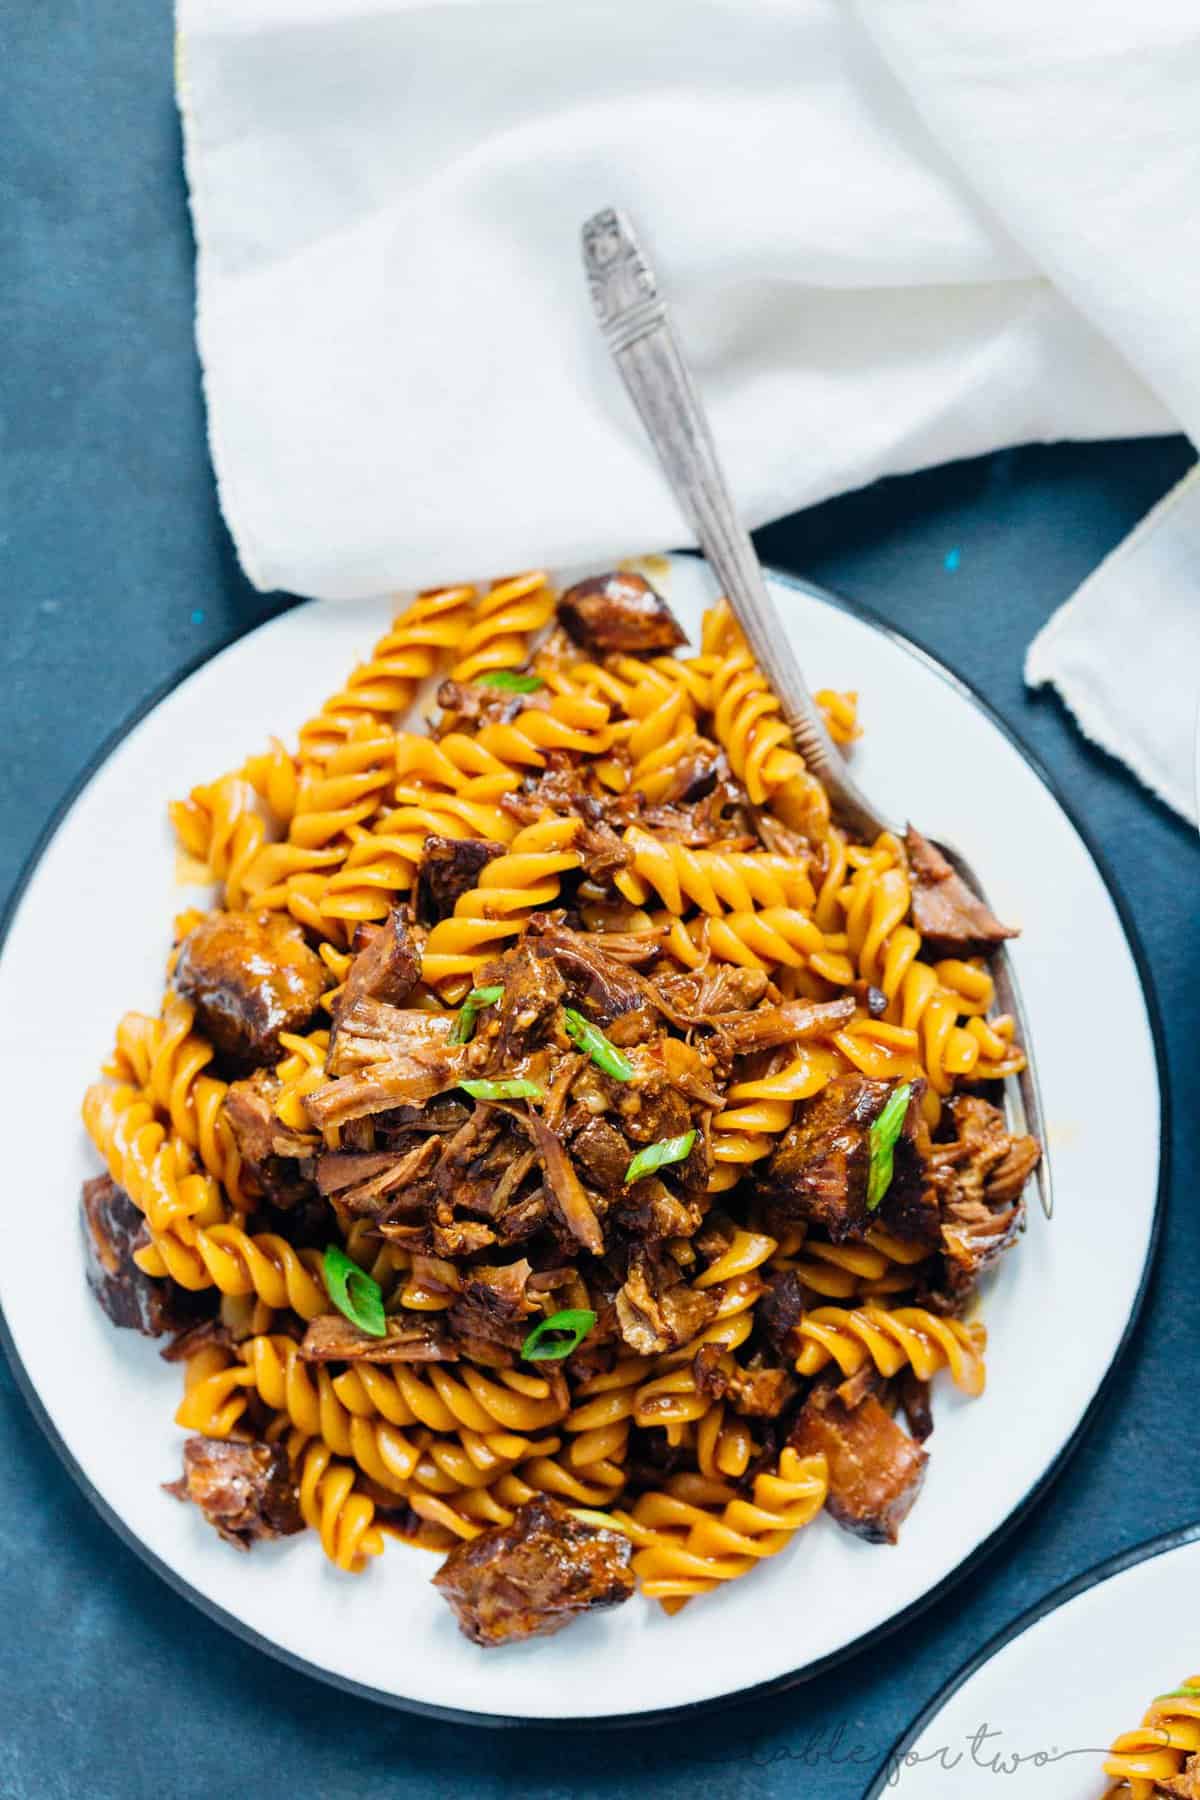 This pressure cooker (Instant Pot) braised Korean beef ragu has got spice, depth of flavor, and so much goodness. Best part? Pressure cooker friendly which means super tender and fall apart beef in about 40 minutes! This is the stick to your ribs dish you'll want when you are in the mood for a rich and dense dish!